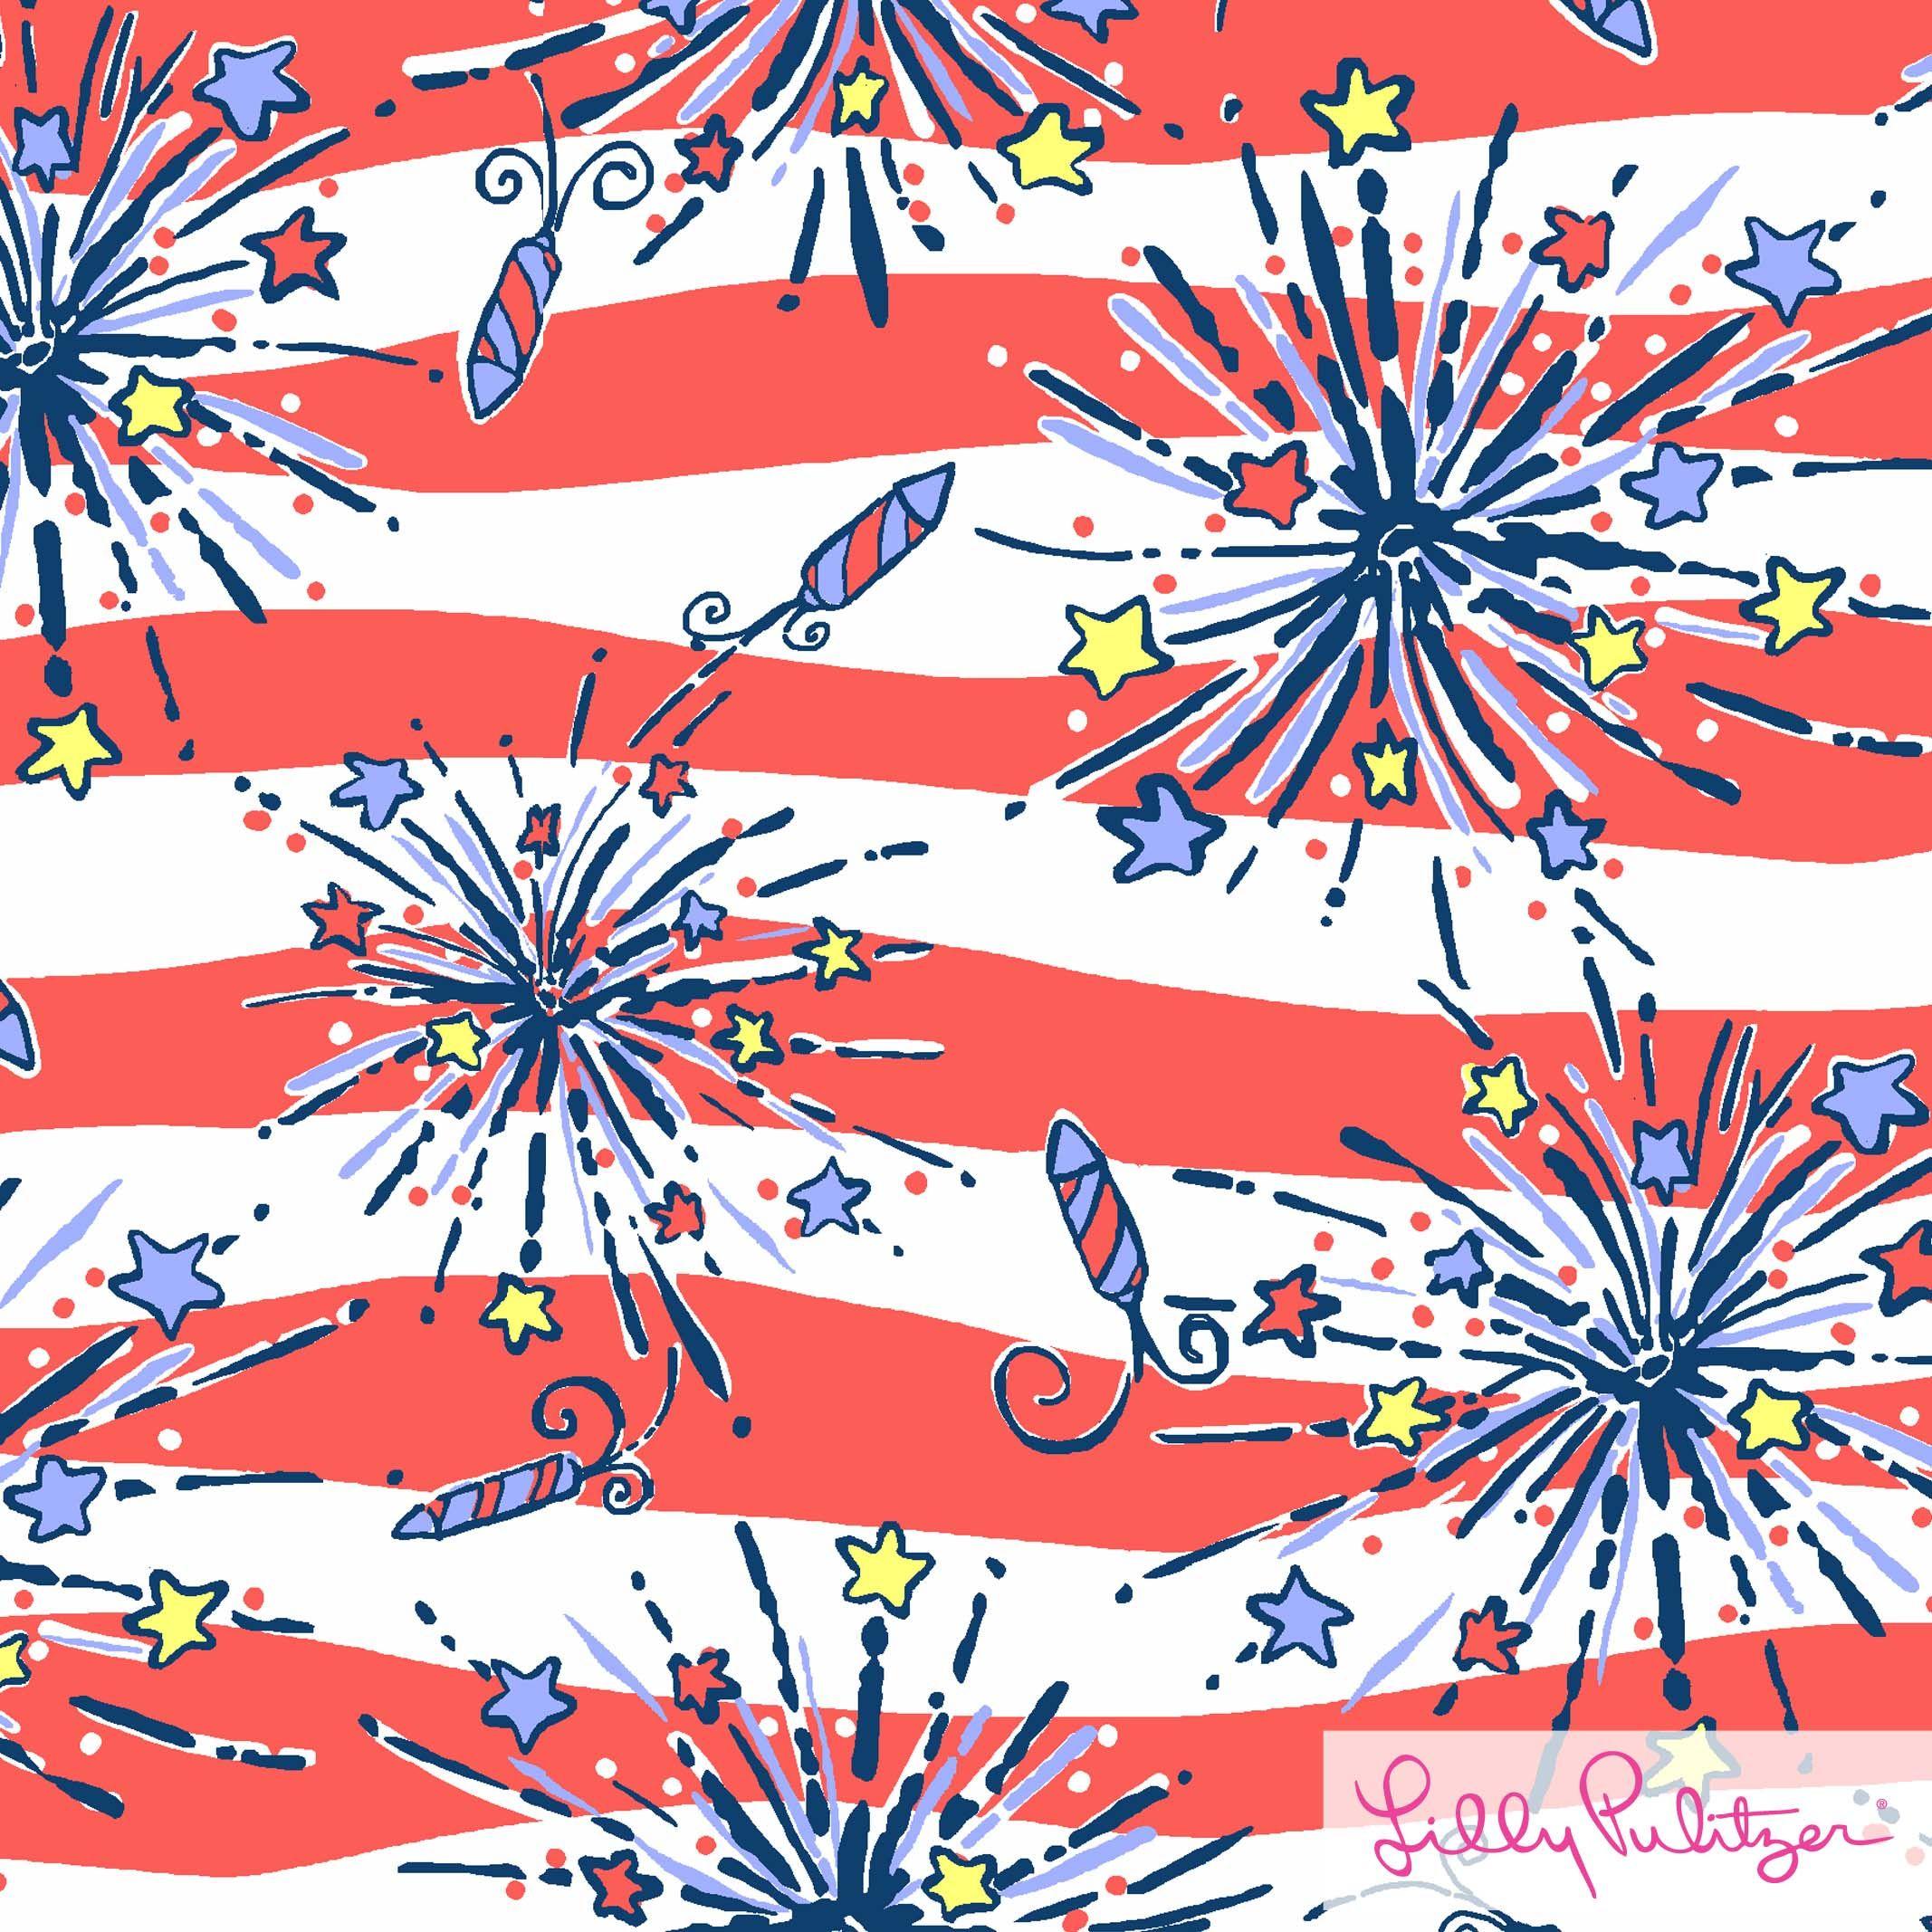 Lilly Pulitzer wallpaper high resolution. Graphics